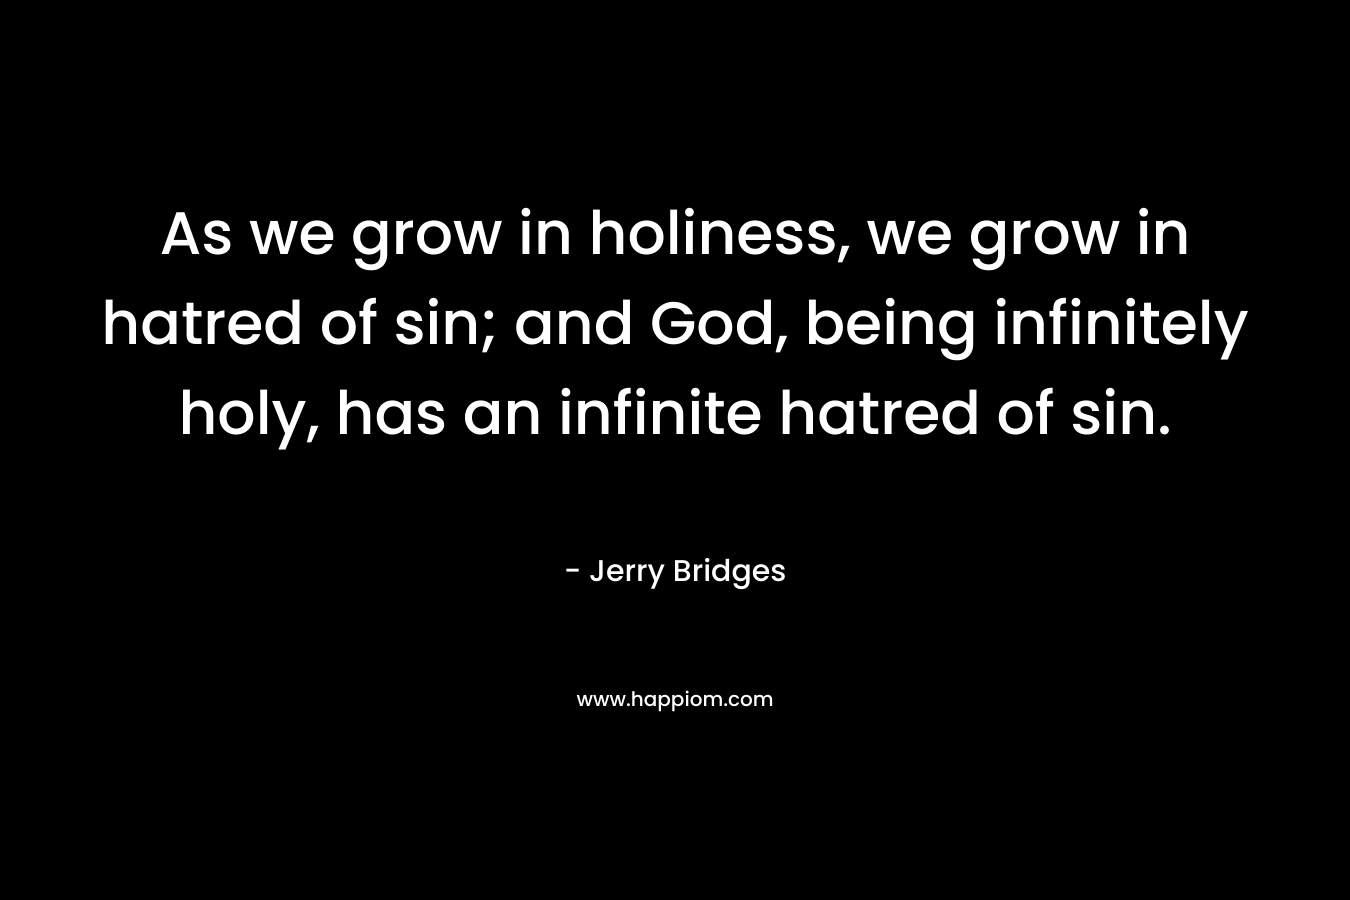 As we grow in holiness, we grow in hatred of sin; and God, being infinitely holy, has an infinite hatred of sin.